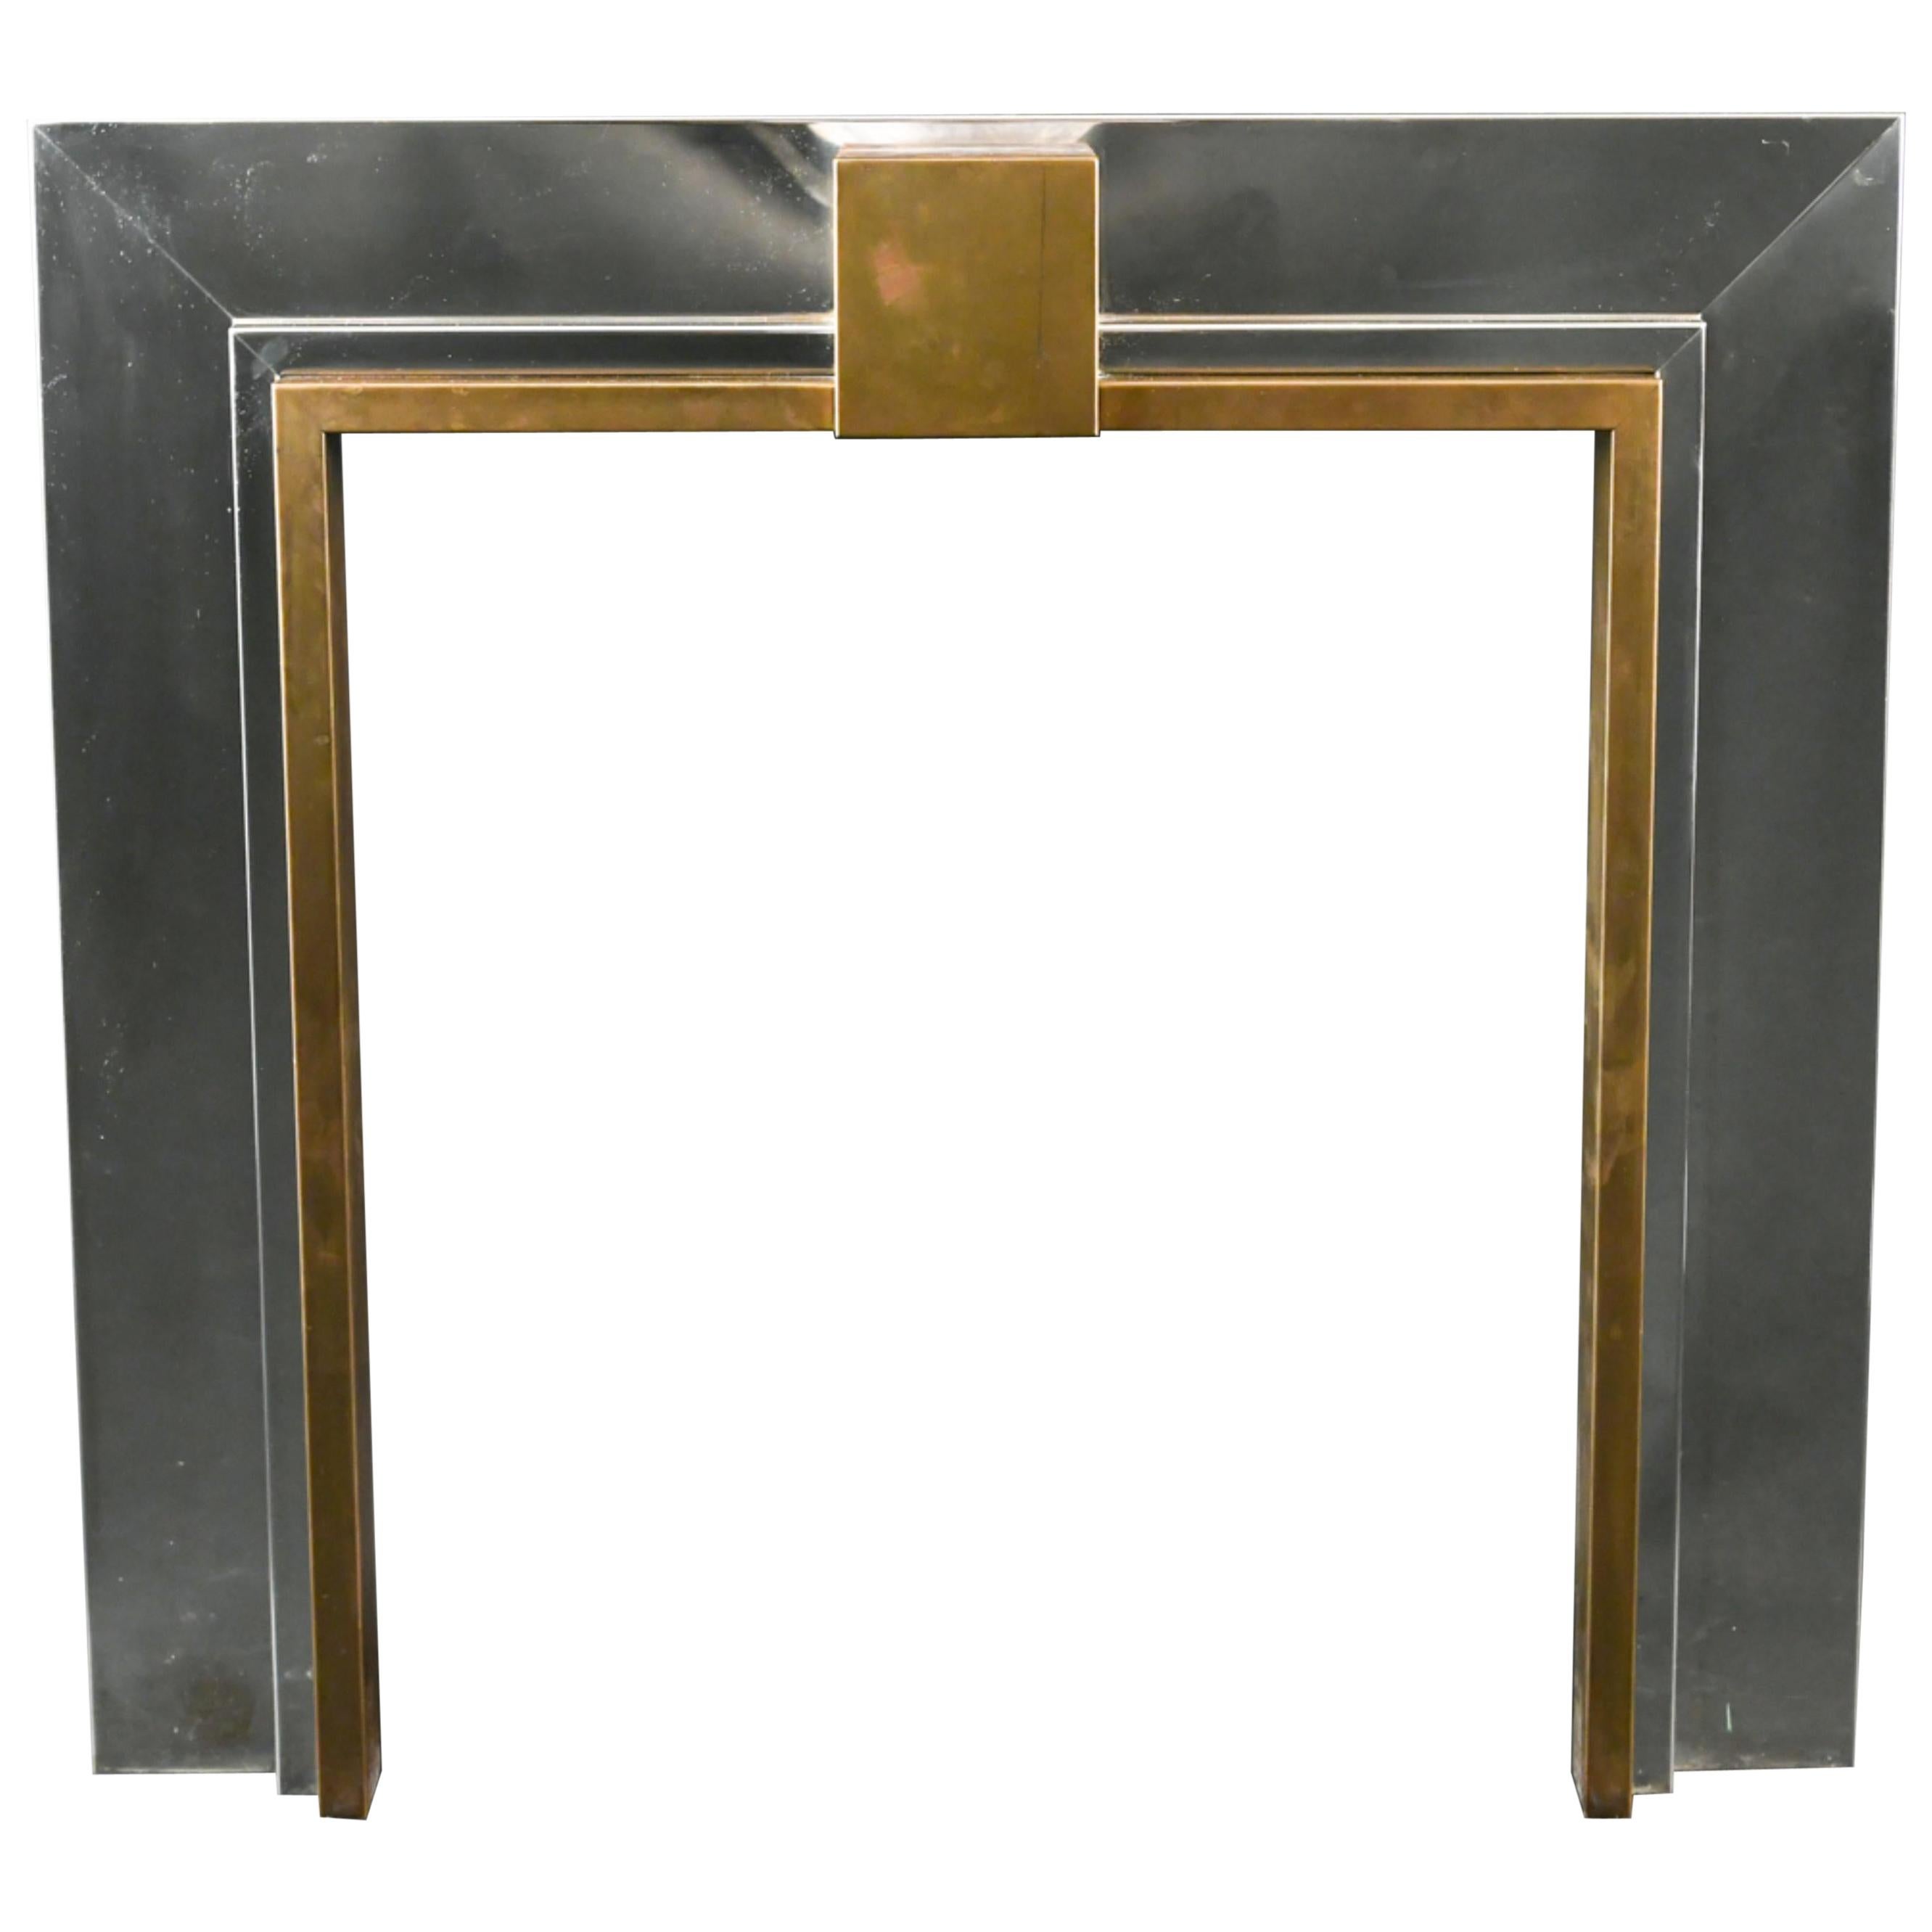 Jansen Fireplace Mantel Chrome and Brass, circa 1970 For Sale